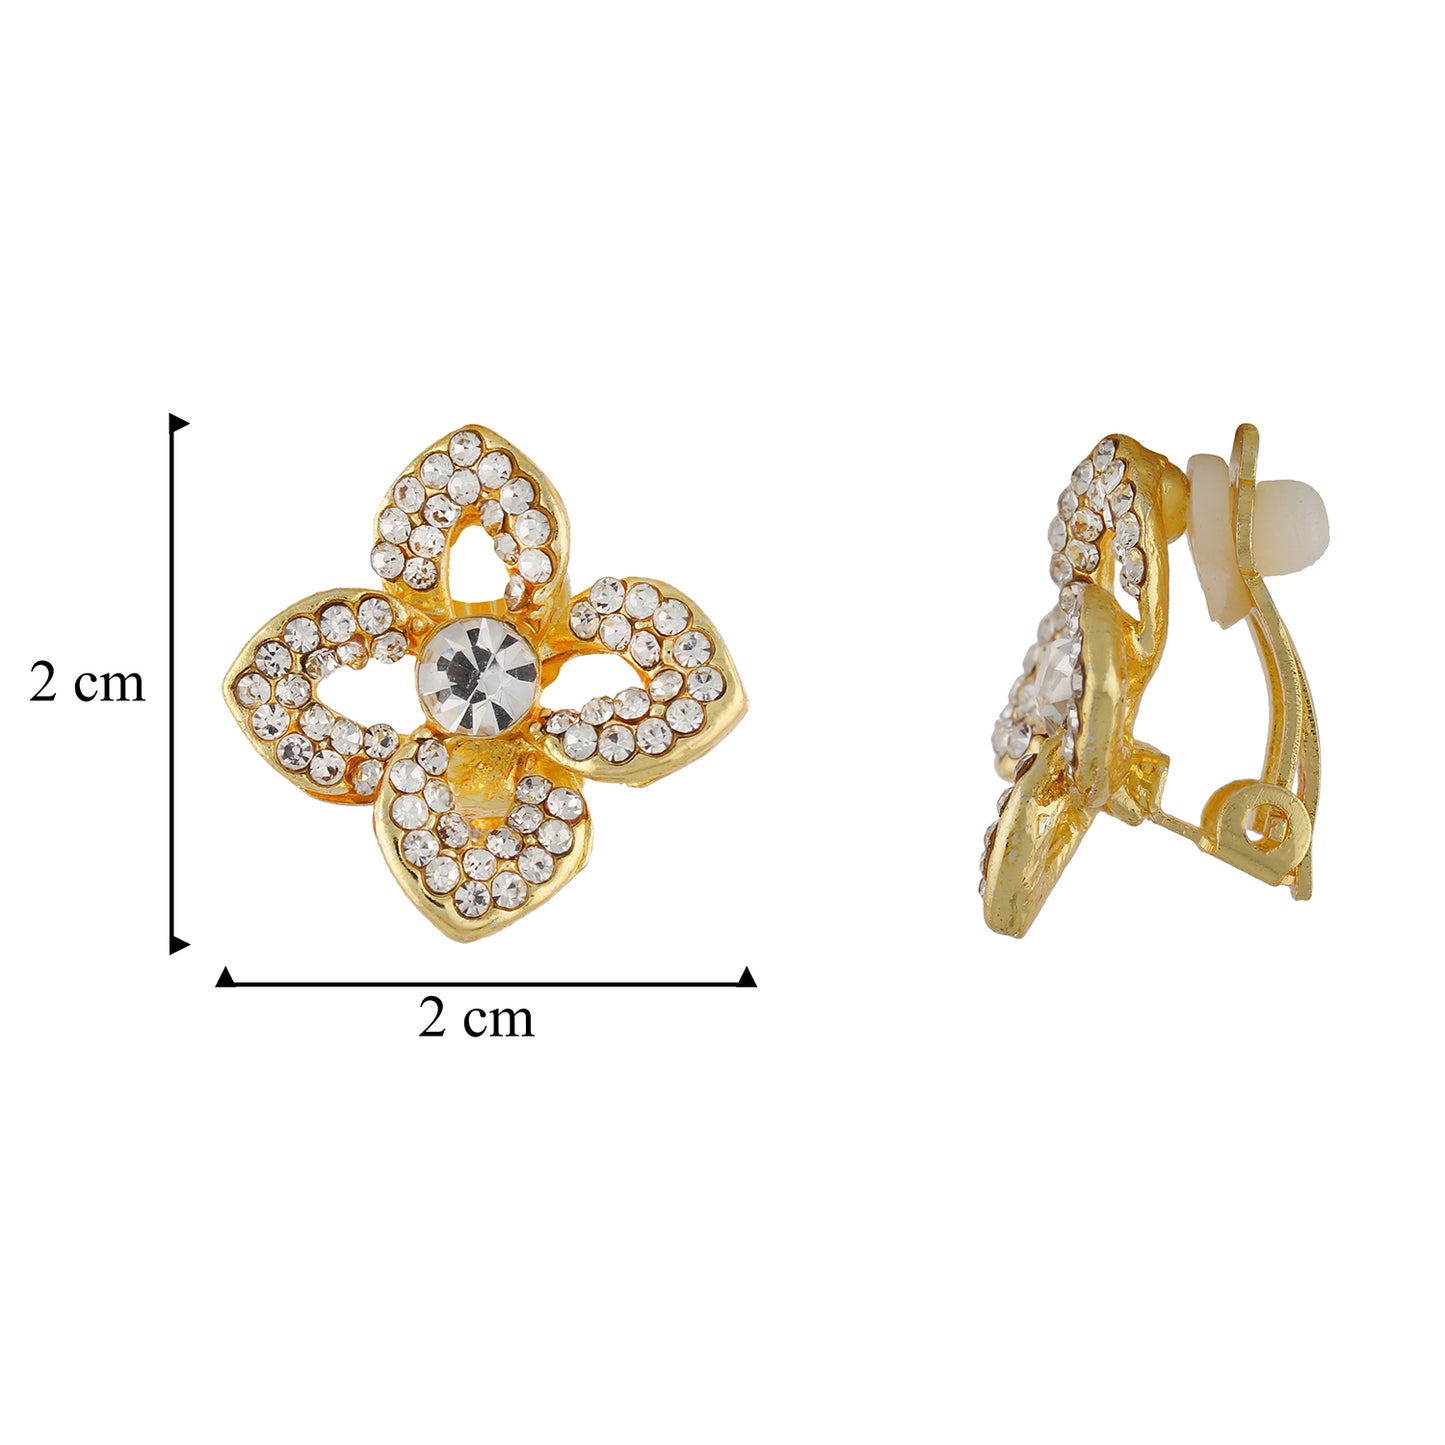 Stylish White and Gold Colour Floral Shape Alloy Clip On Earrings for Girls with on Pierced Ears